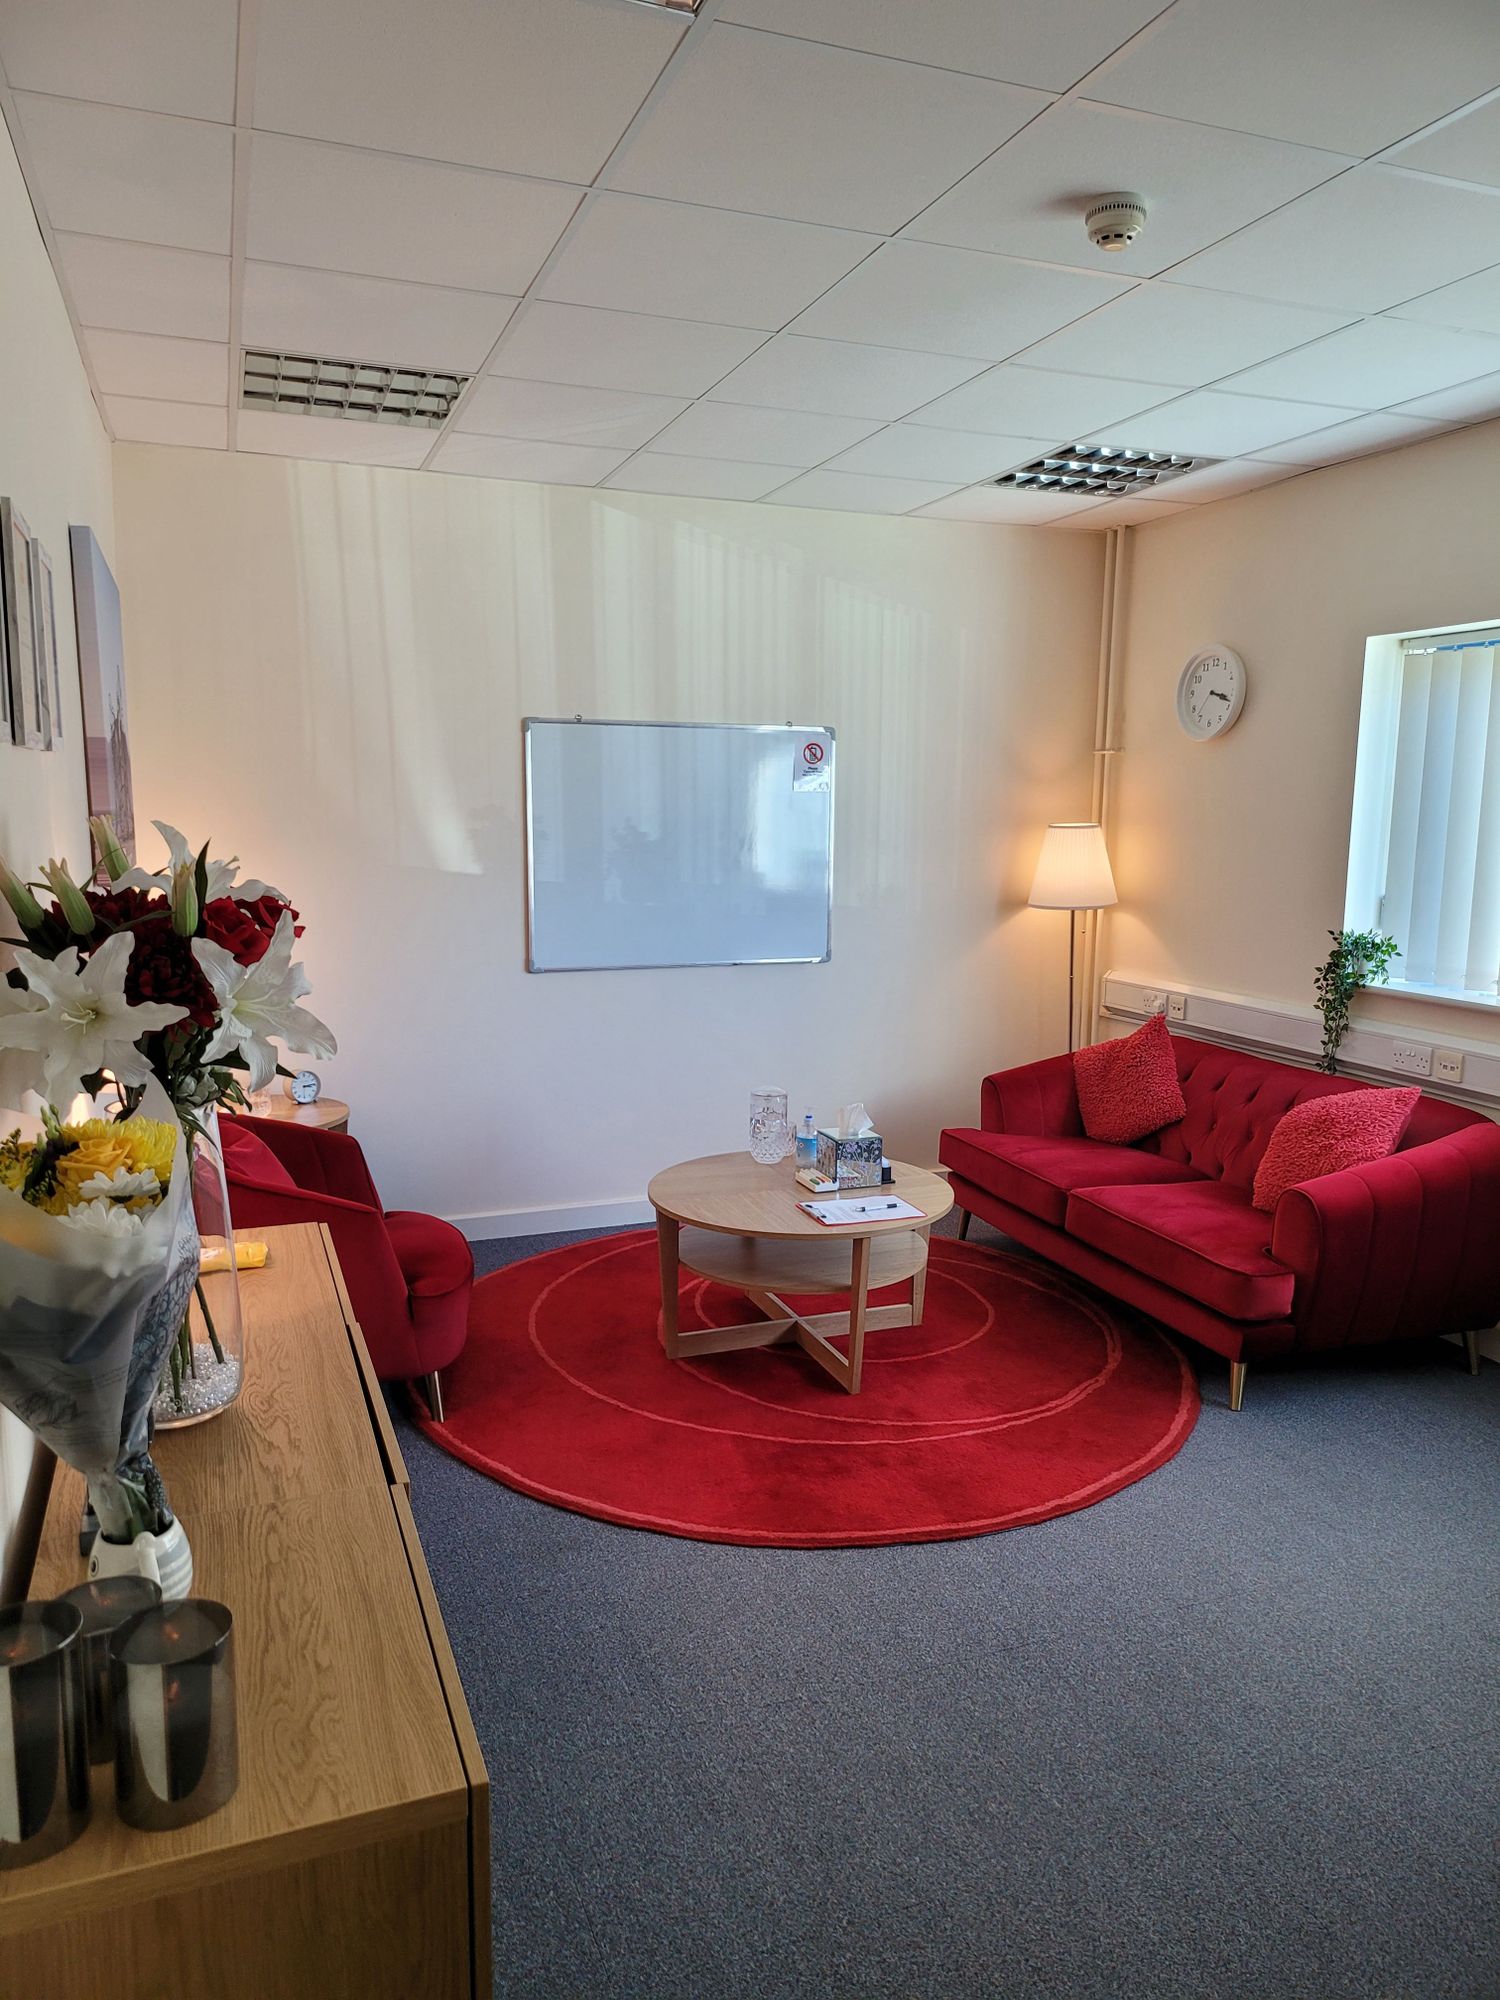 Gallery Photo of Therapy Room in Broadstairs